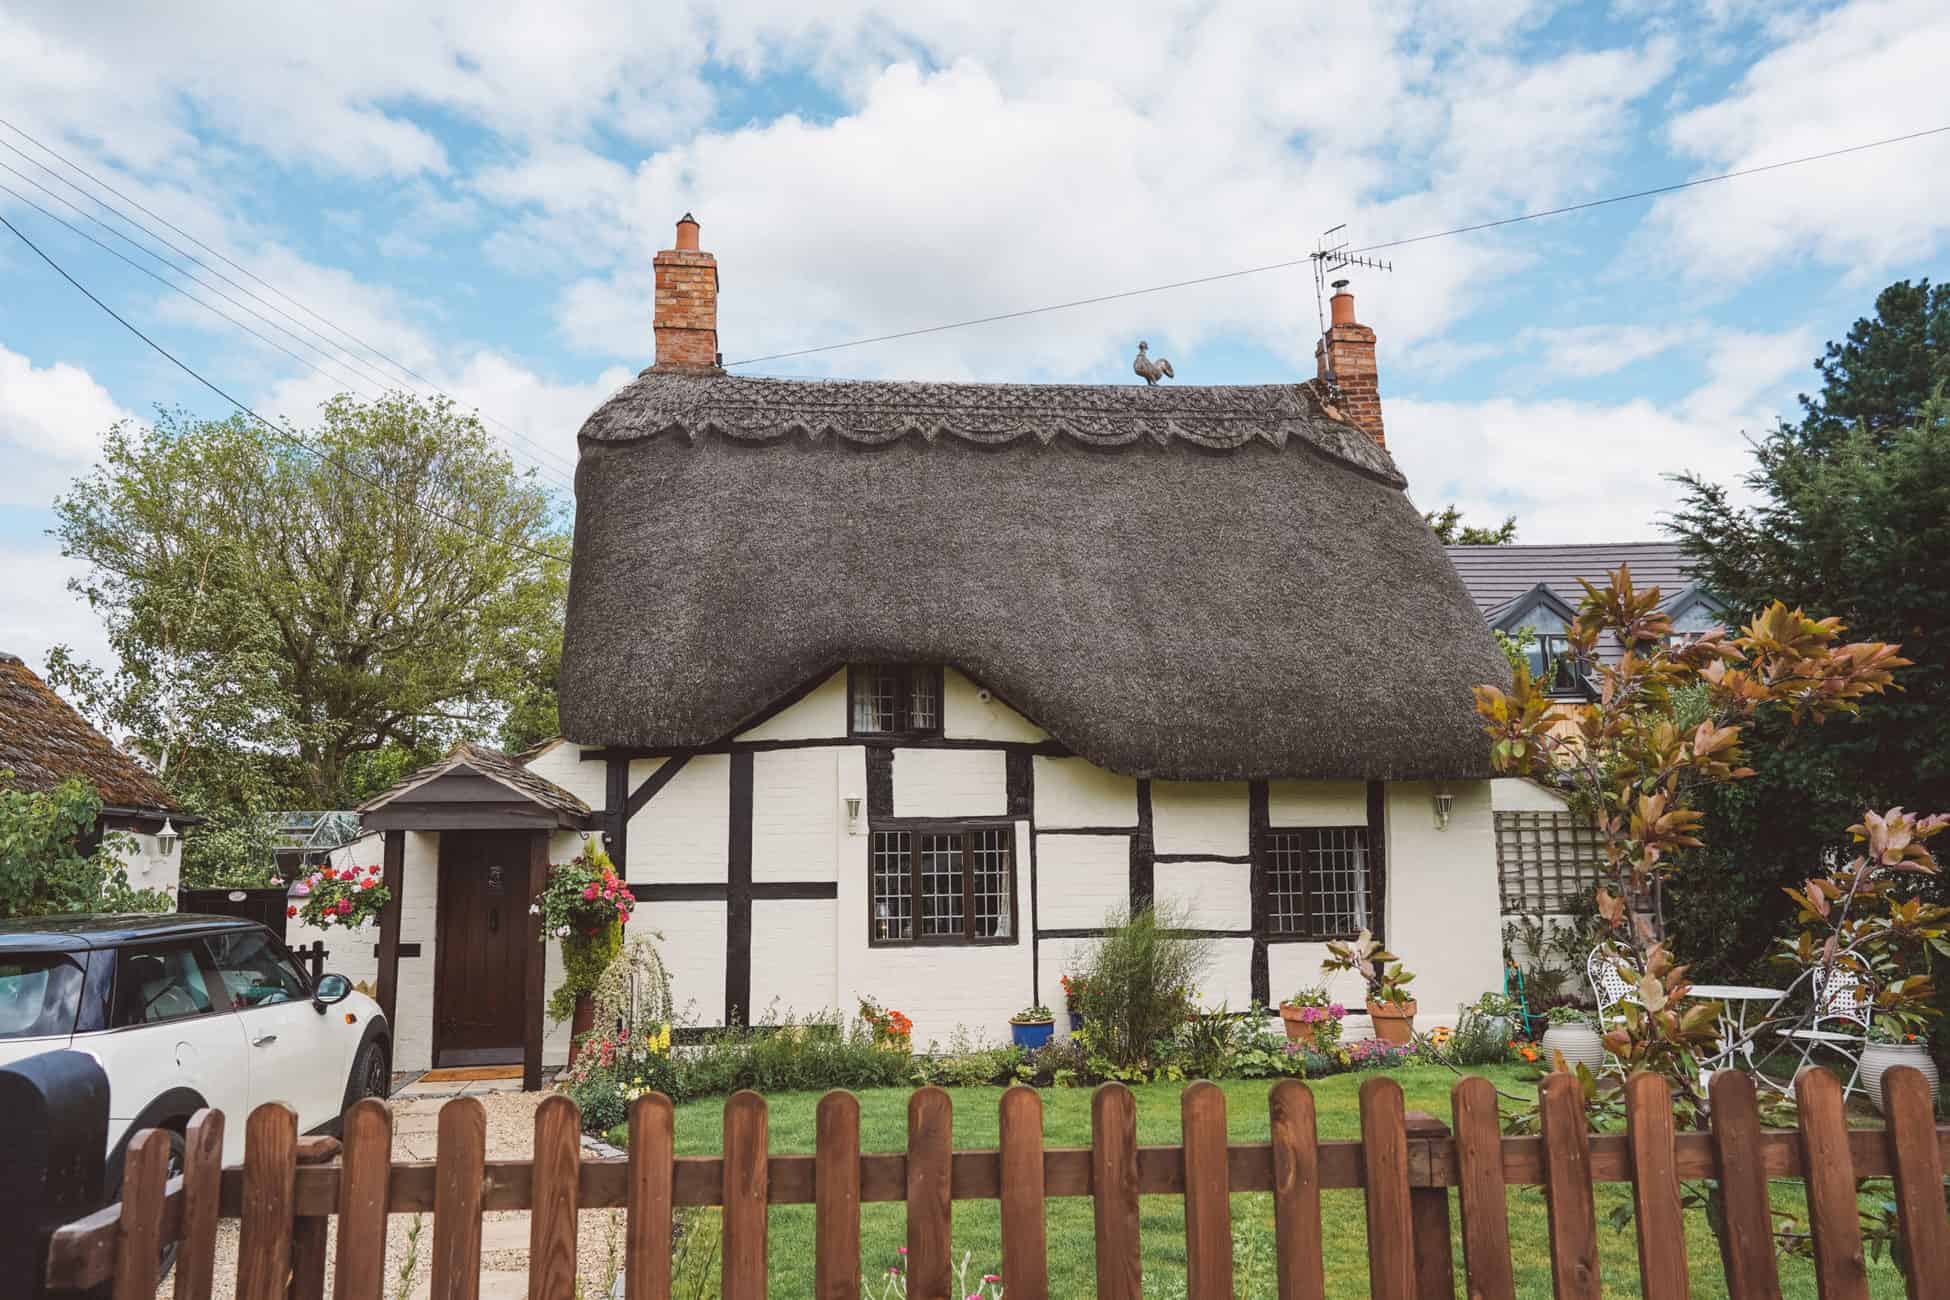 Welford on Avon – the prettiest Thatched village in England